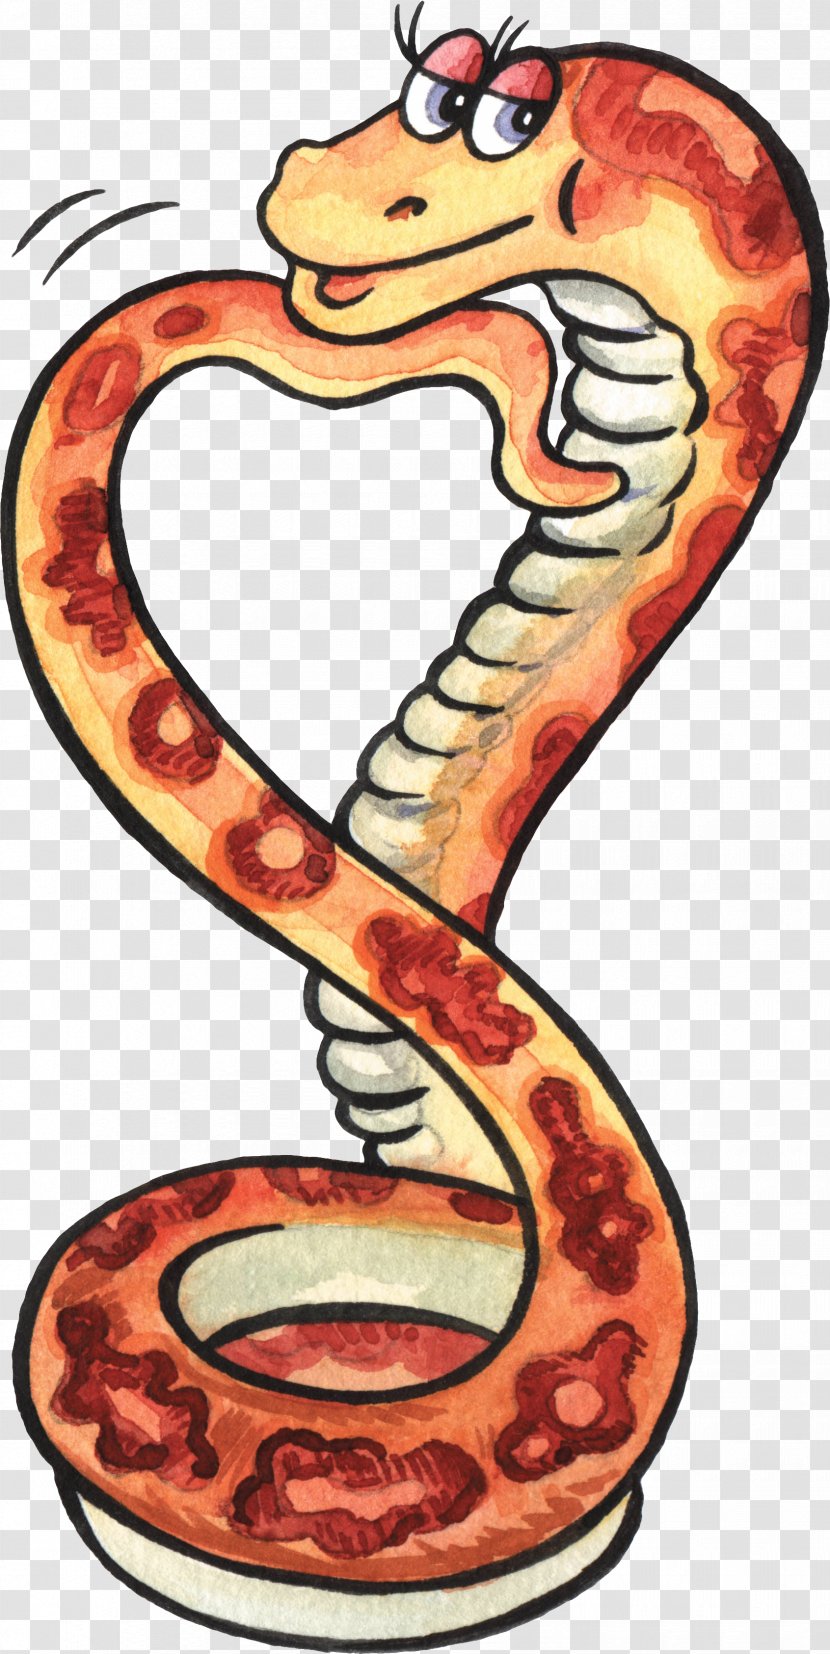 Snake Drawing Cartoon Clip Art - Serpent - The Free Download Transparent PNG